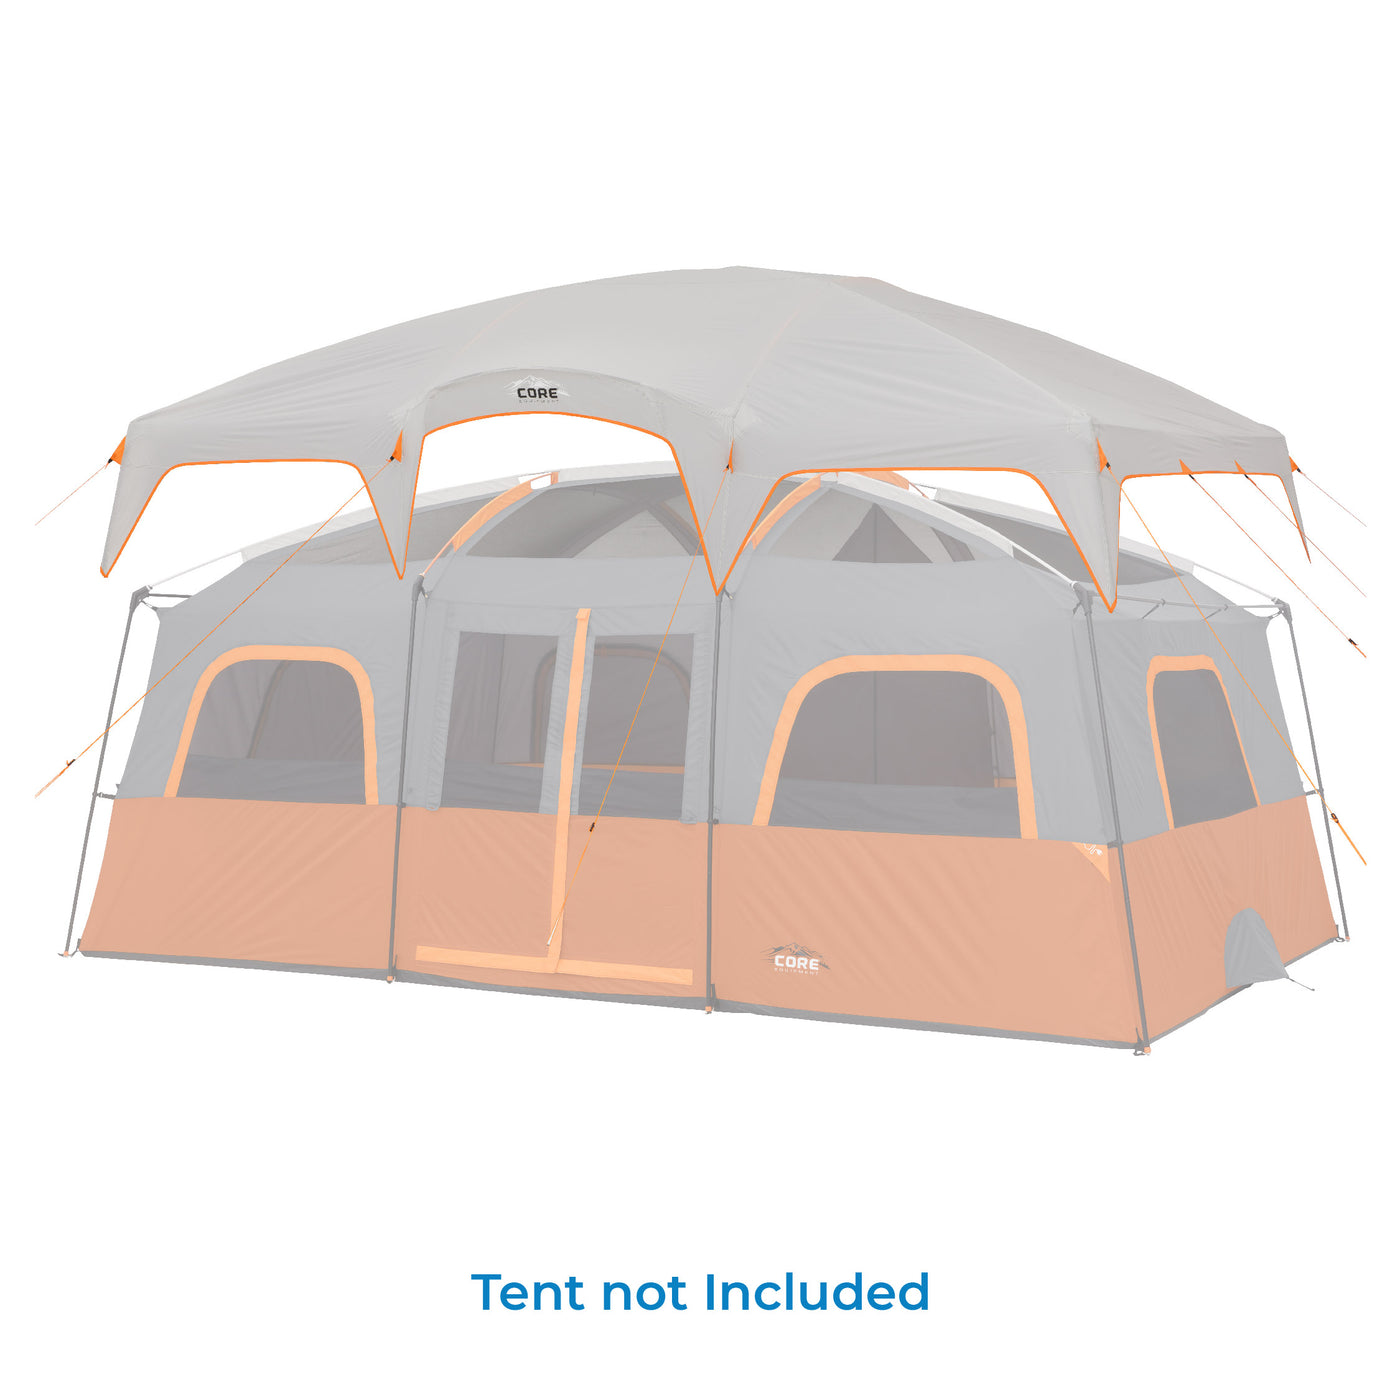 12 Person Straight Wall Cabin Tent Rainfly